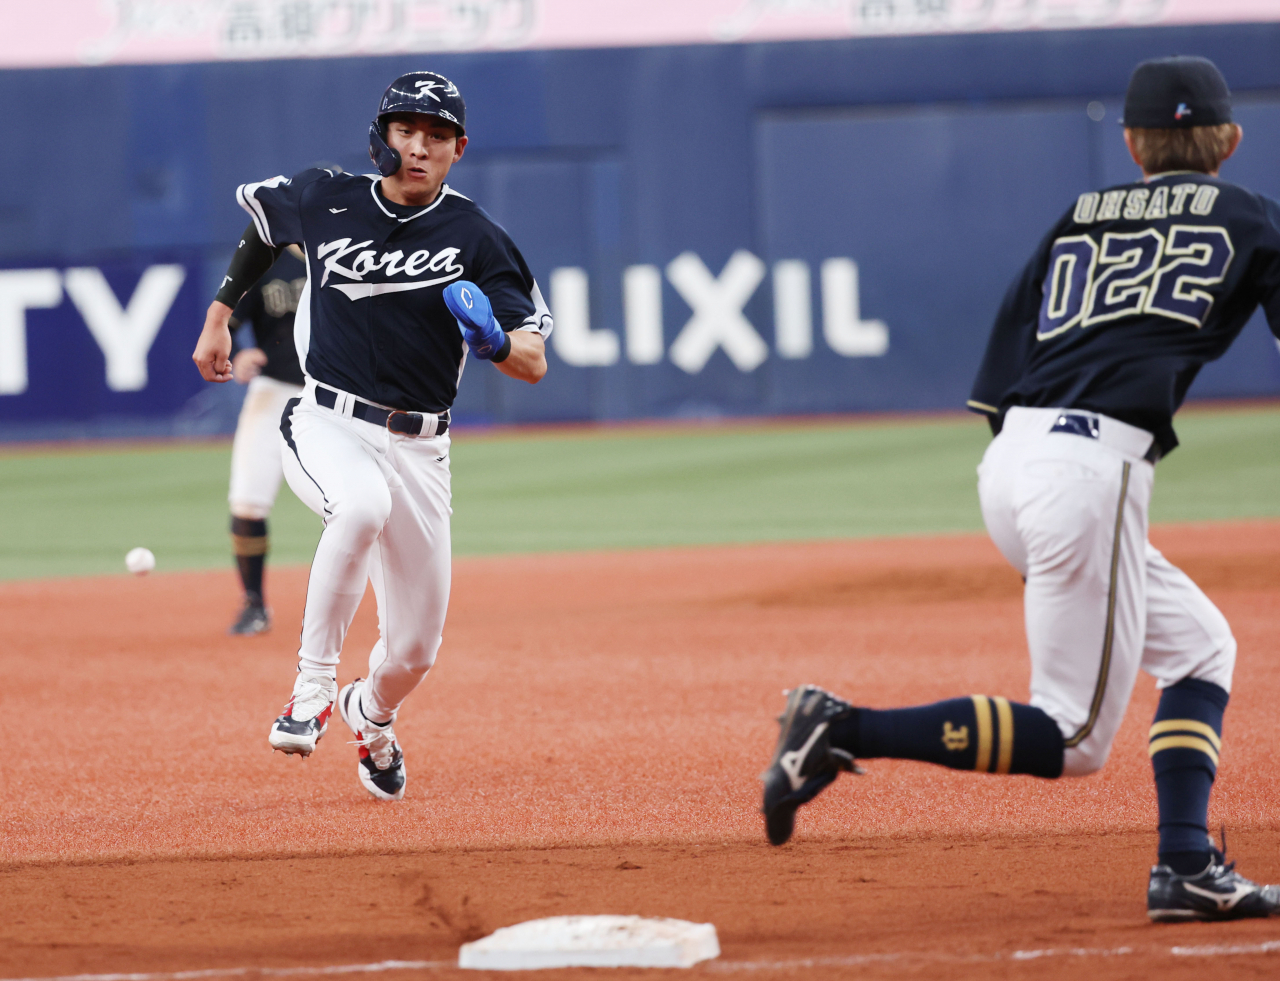 Lee Jung-hoo of South Korea heads to third base on a single during an exhibition game against the Orix Buffaloes ahead of the World Baseball Classic at Kyocera Dome Osaka in Osaka on Monday. (Yonhap)